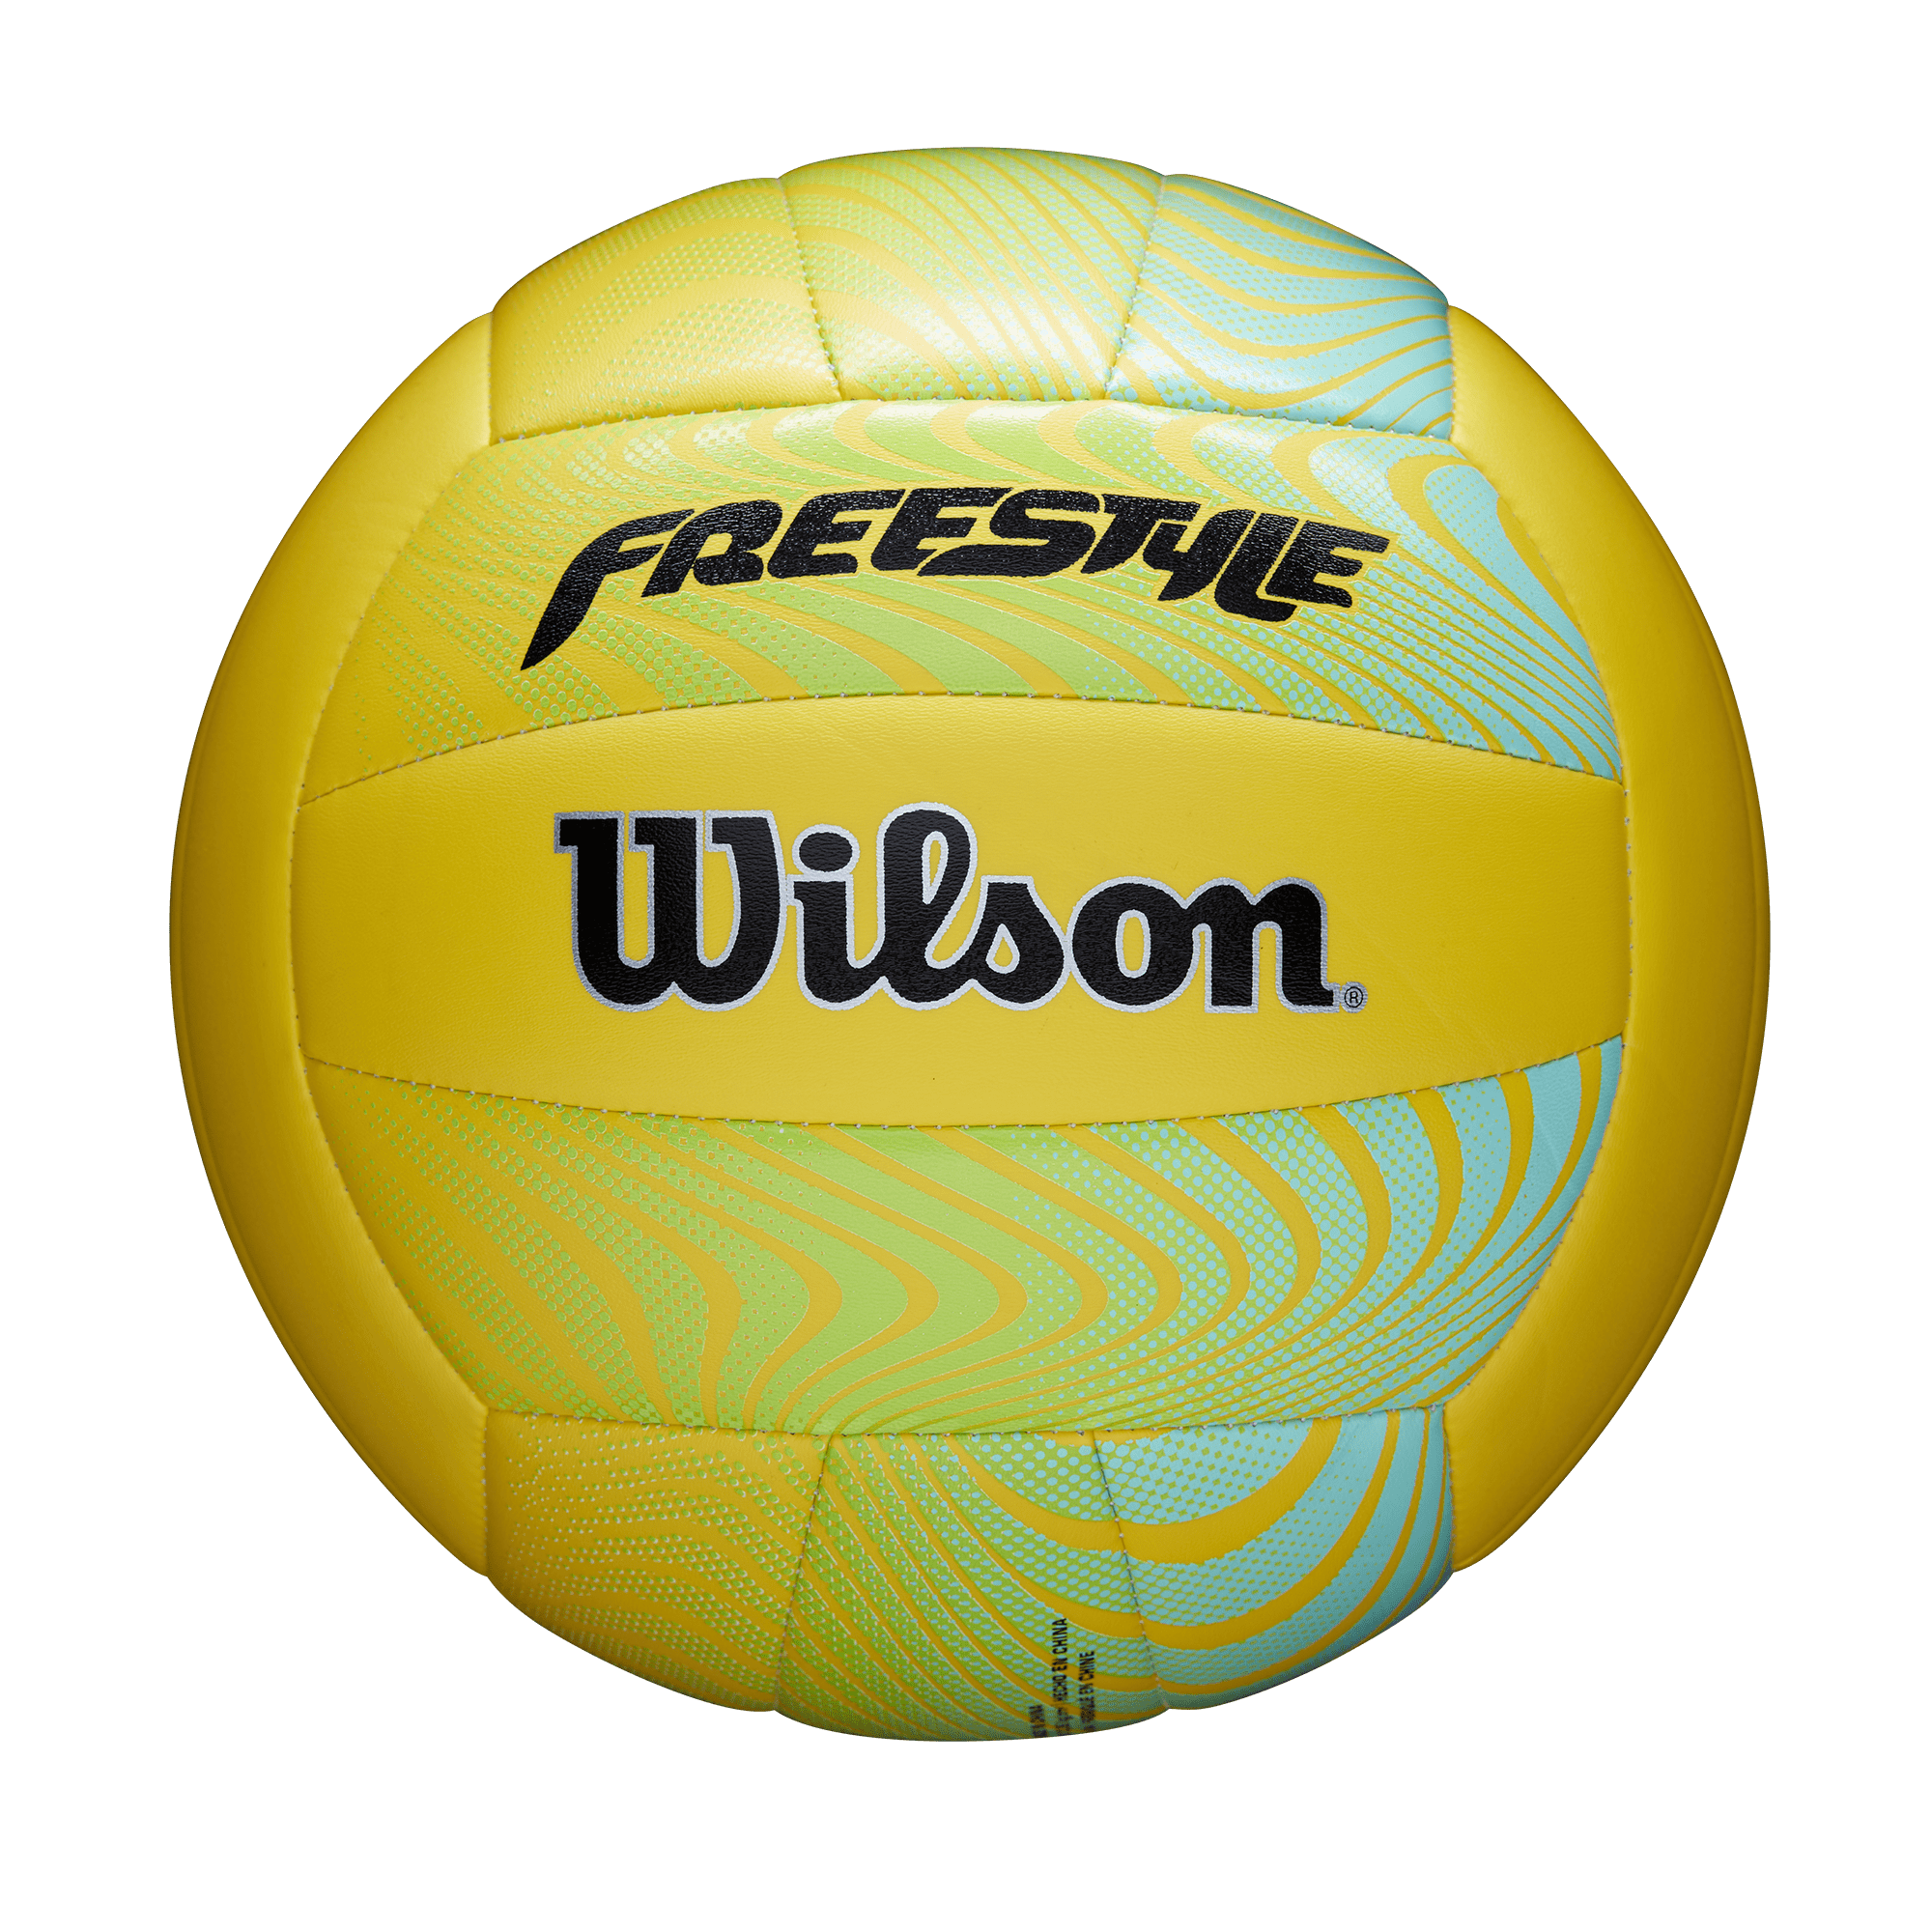 SOFT PLAY VOLLEYBALL 300G CYAN *CLEARANCE NEW* WILSON 